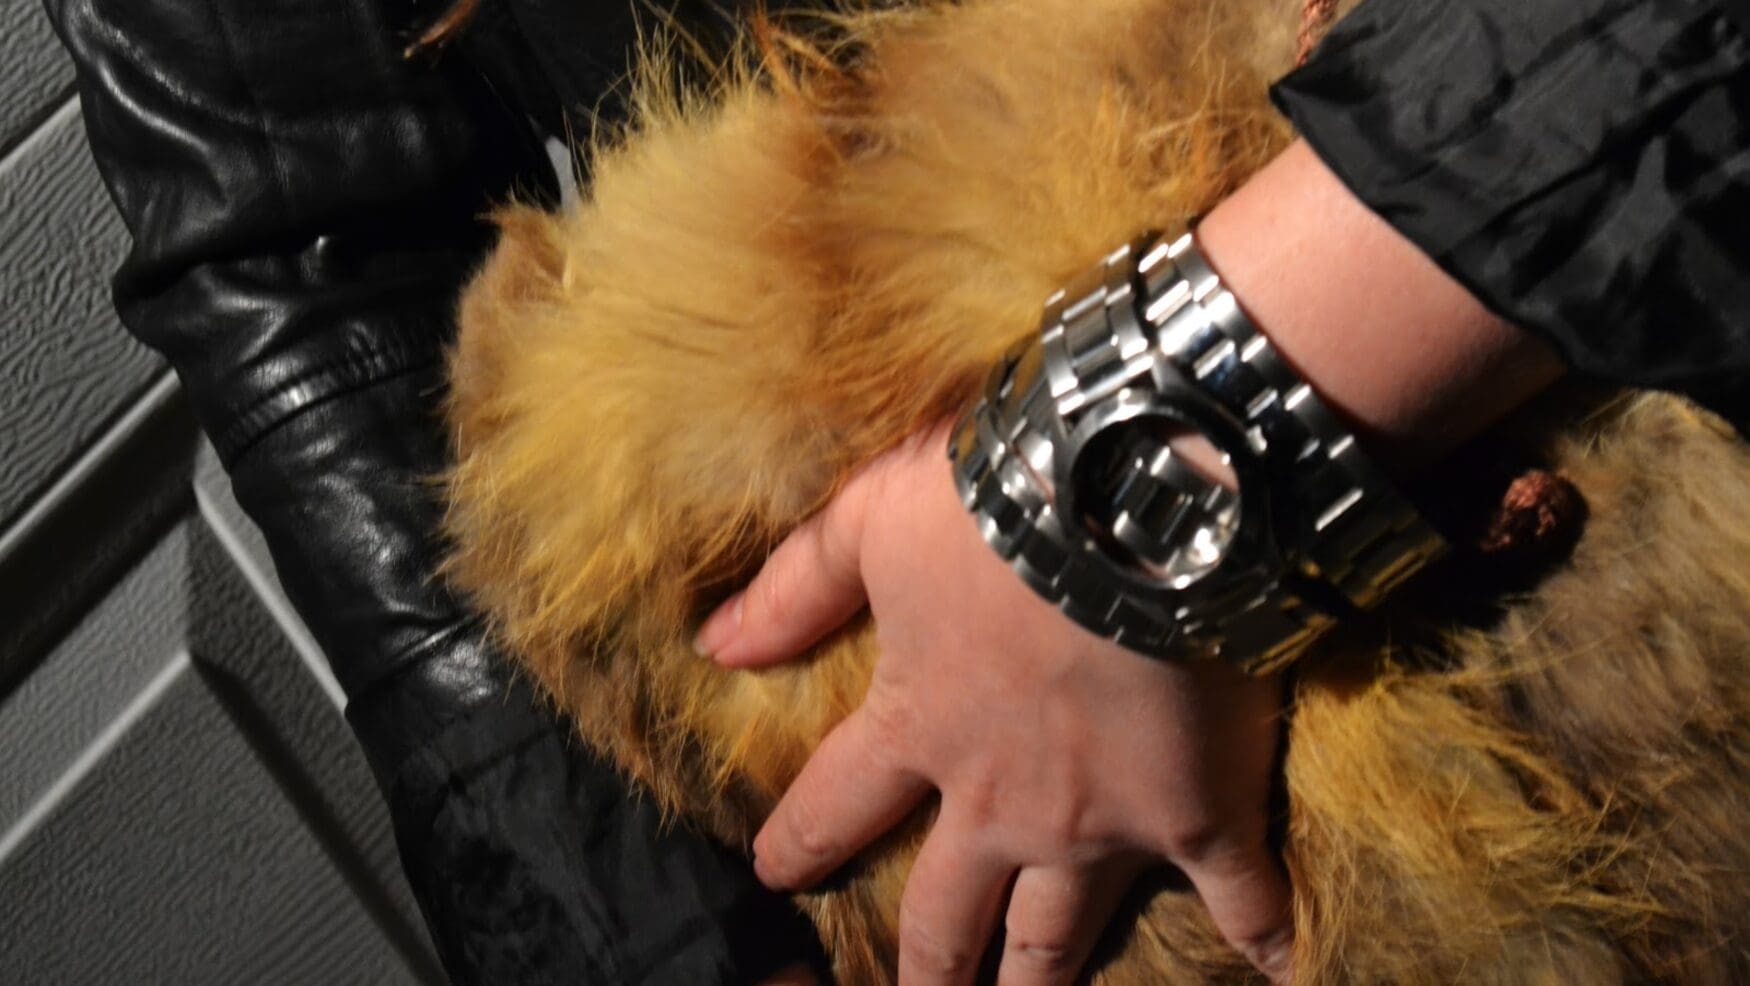 Throwback to the time Maison Margiela made the most useless ‘watch’ ever